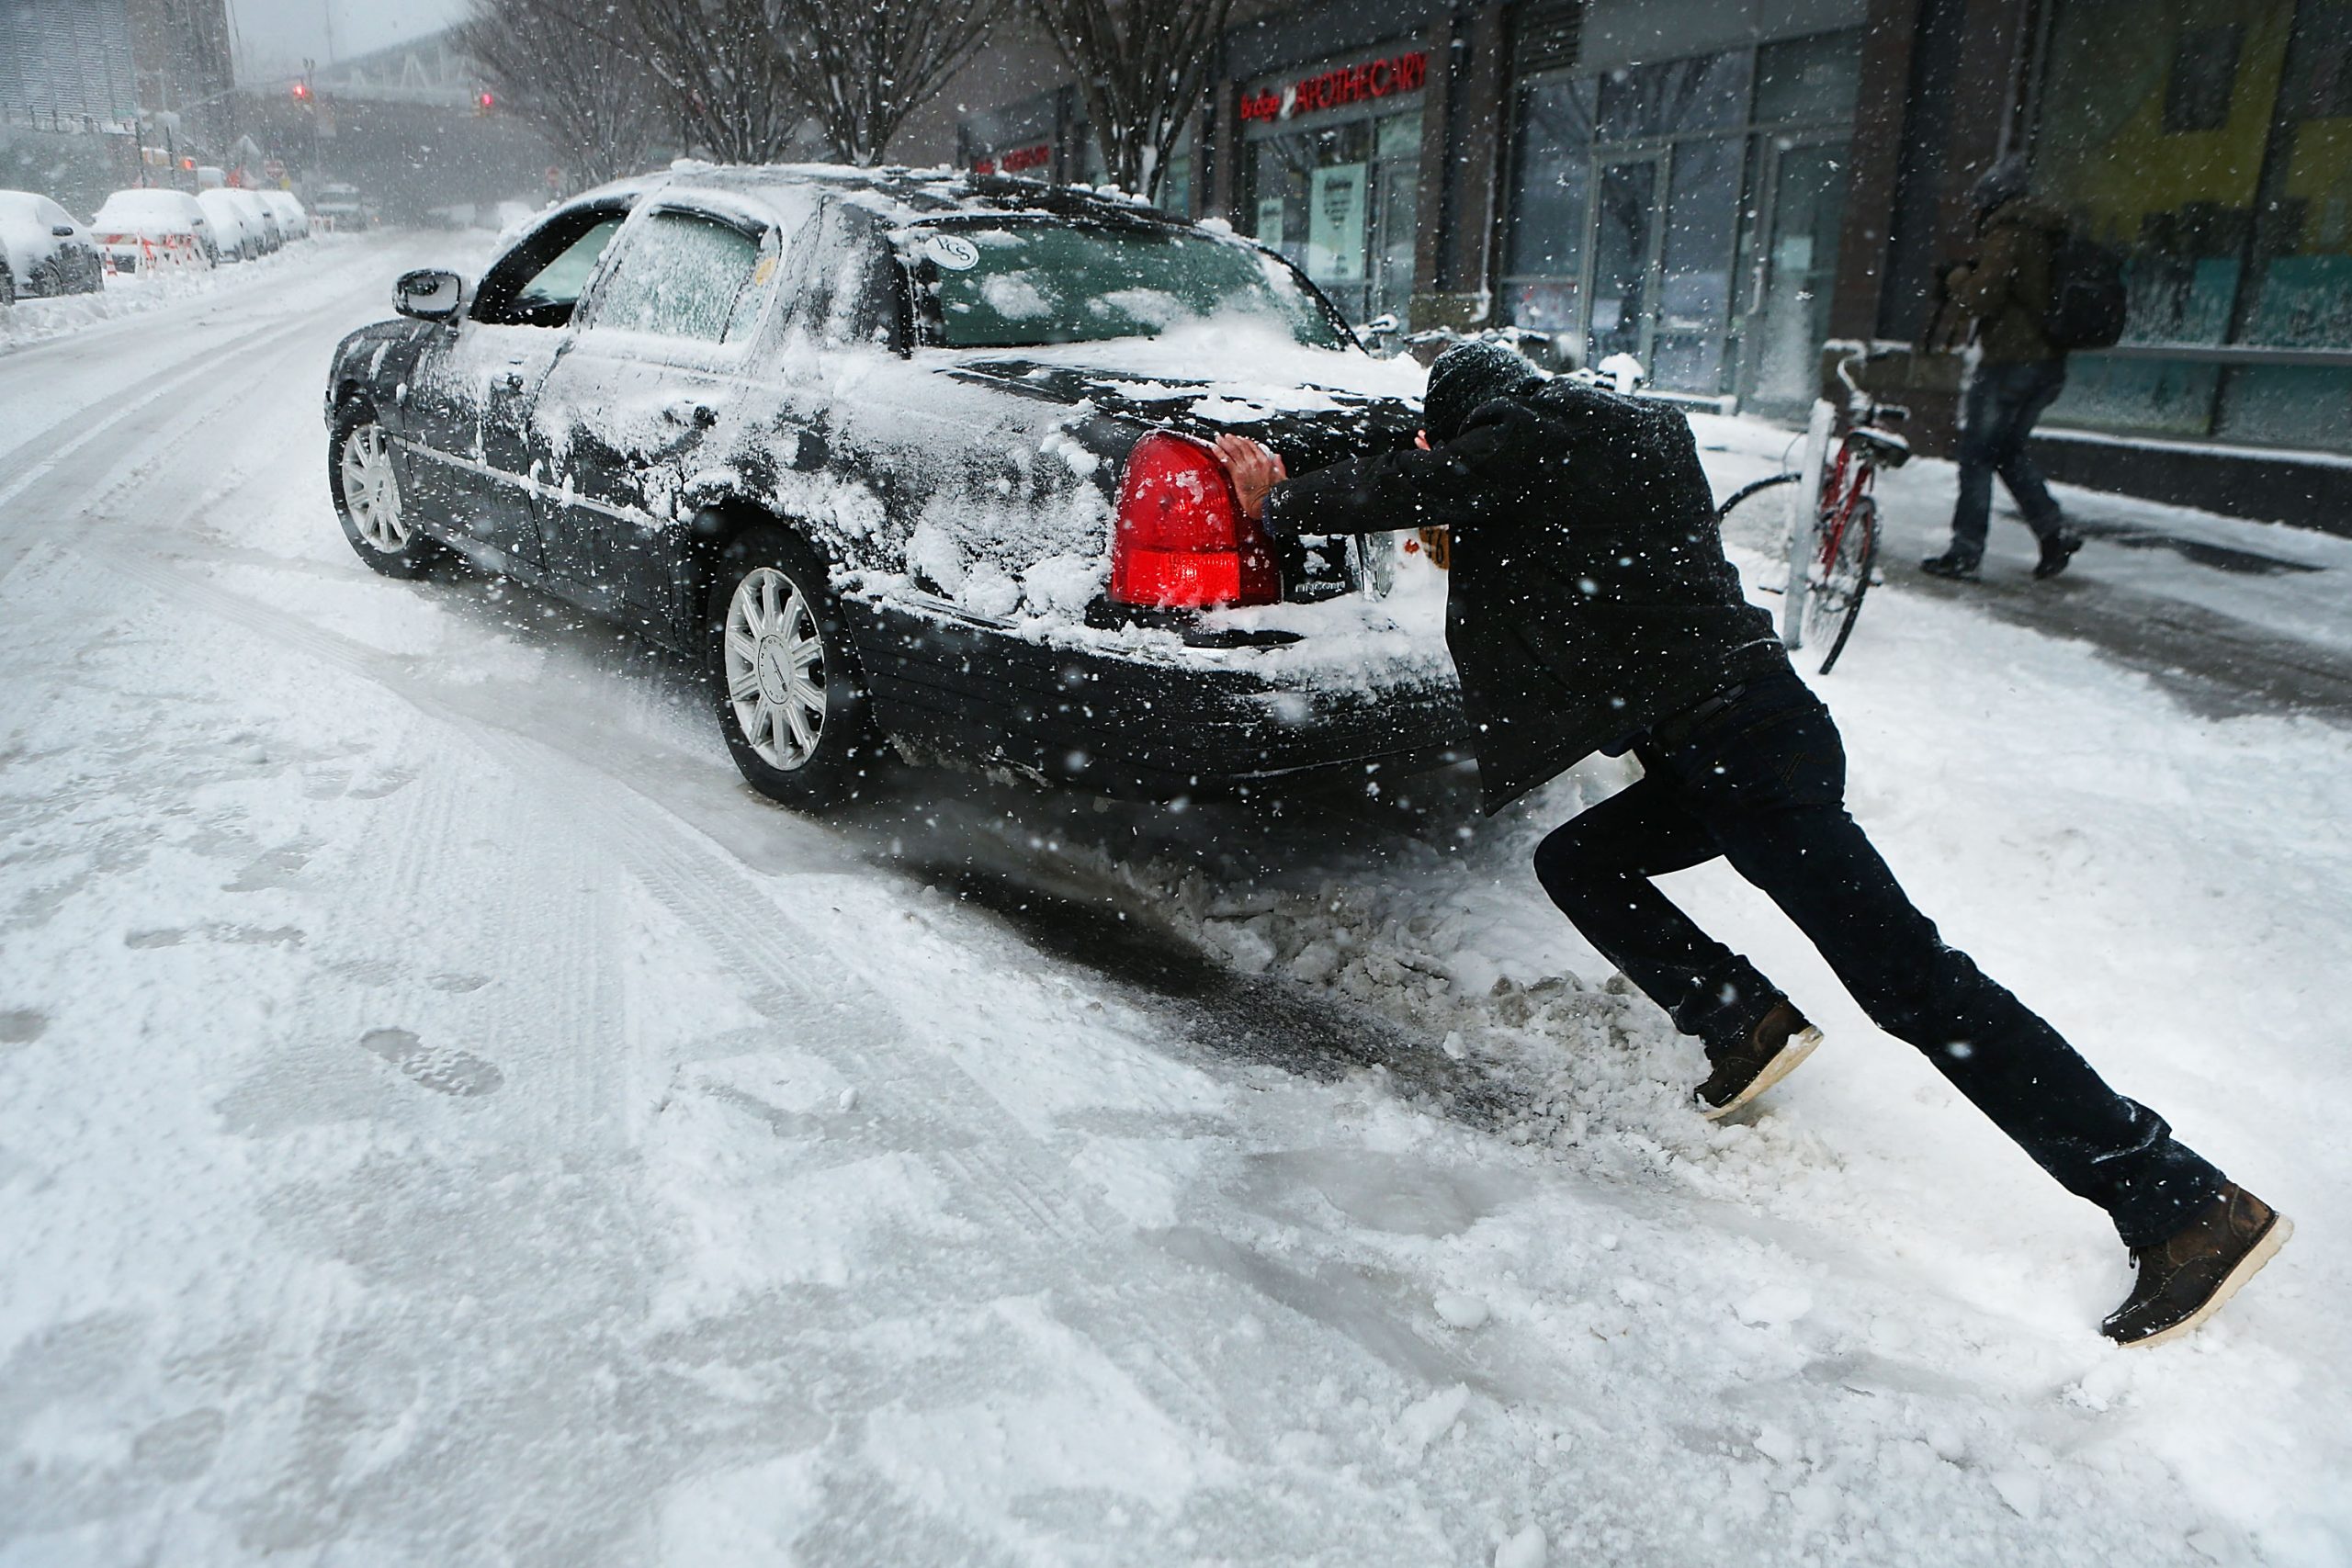 A man pushes a car stuck in the snow during a blizzard